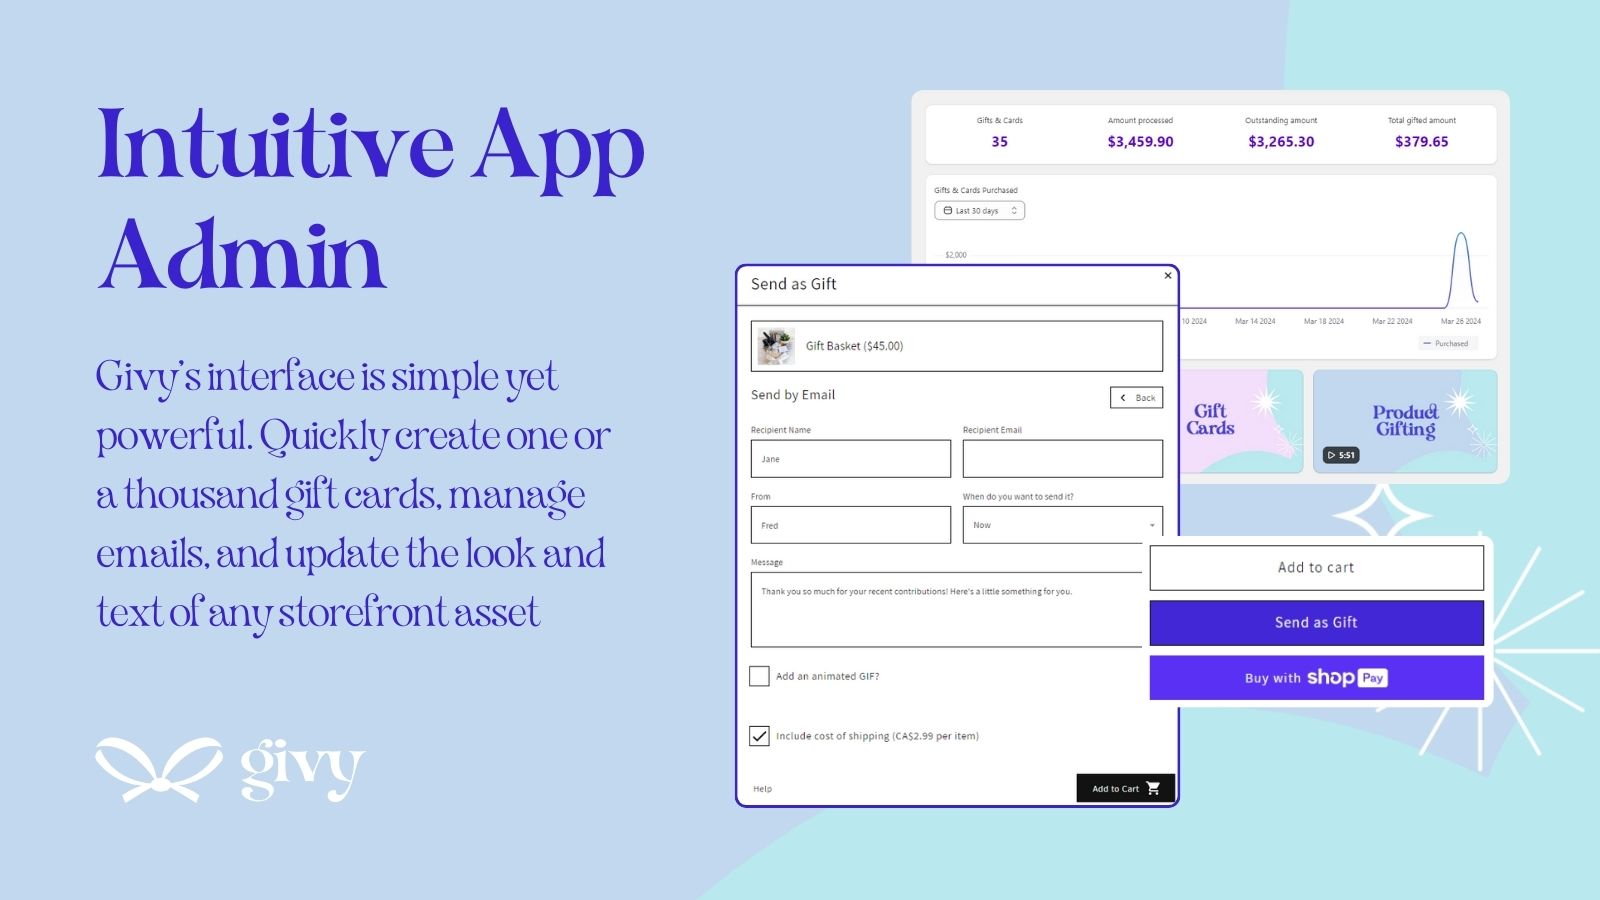 Givy's app admin is simple, intuitive, and powerful